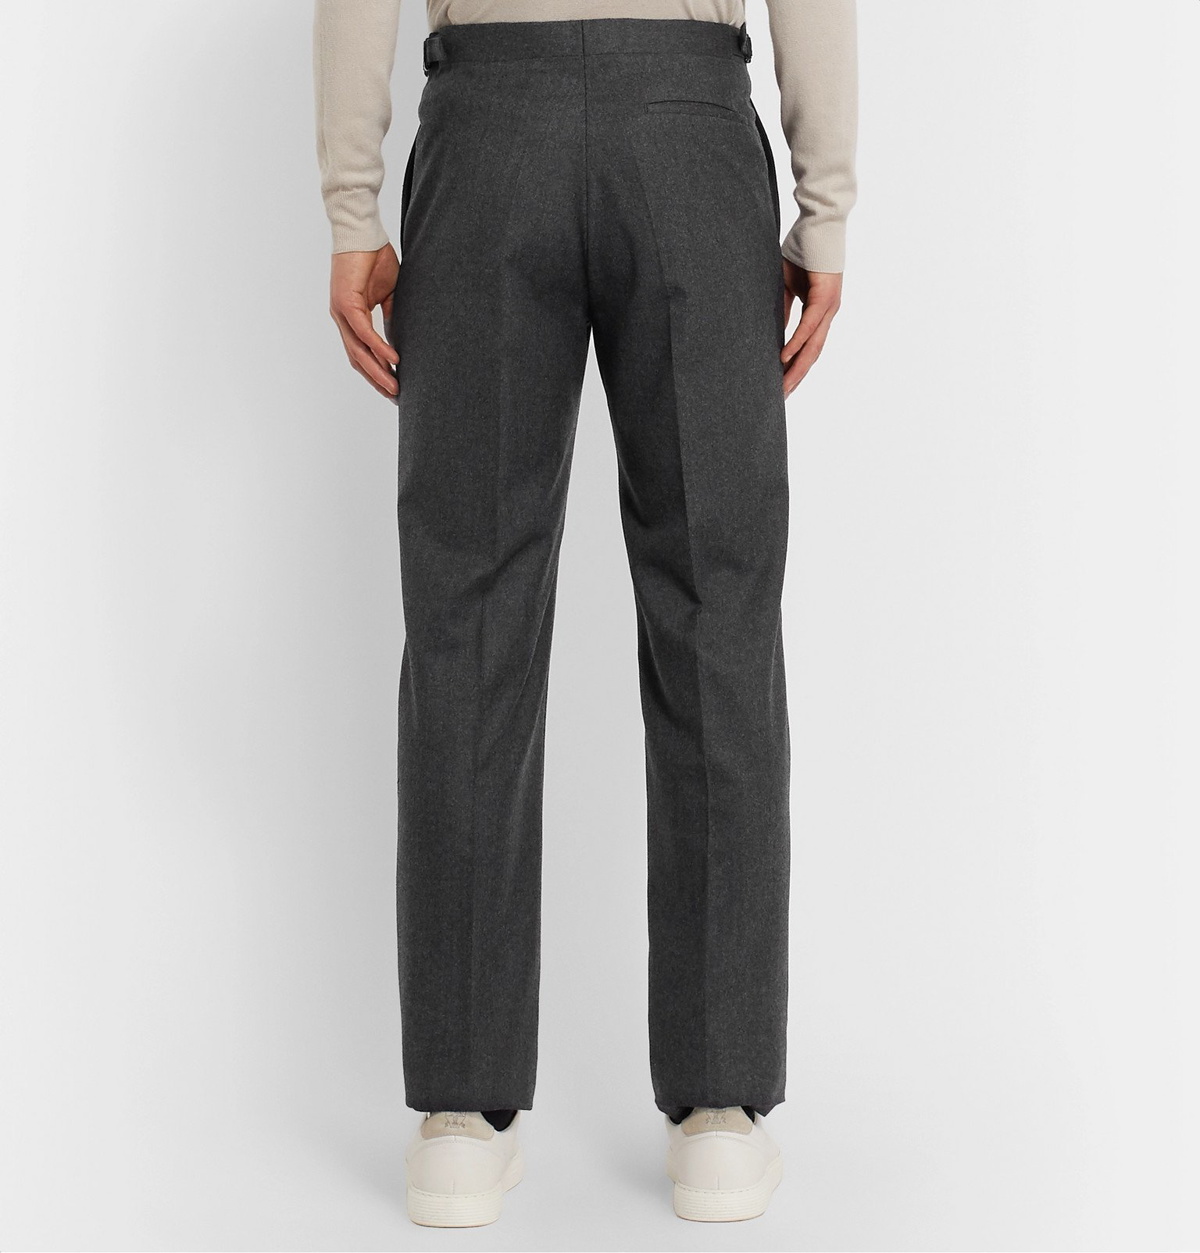 Beams F Pleated Flannel Trousers Grey Check at CareOfCarlcom